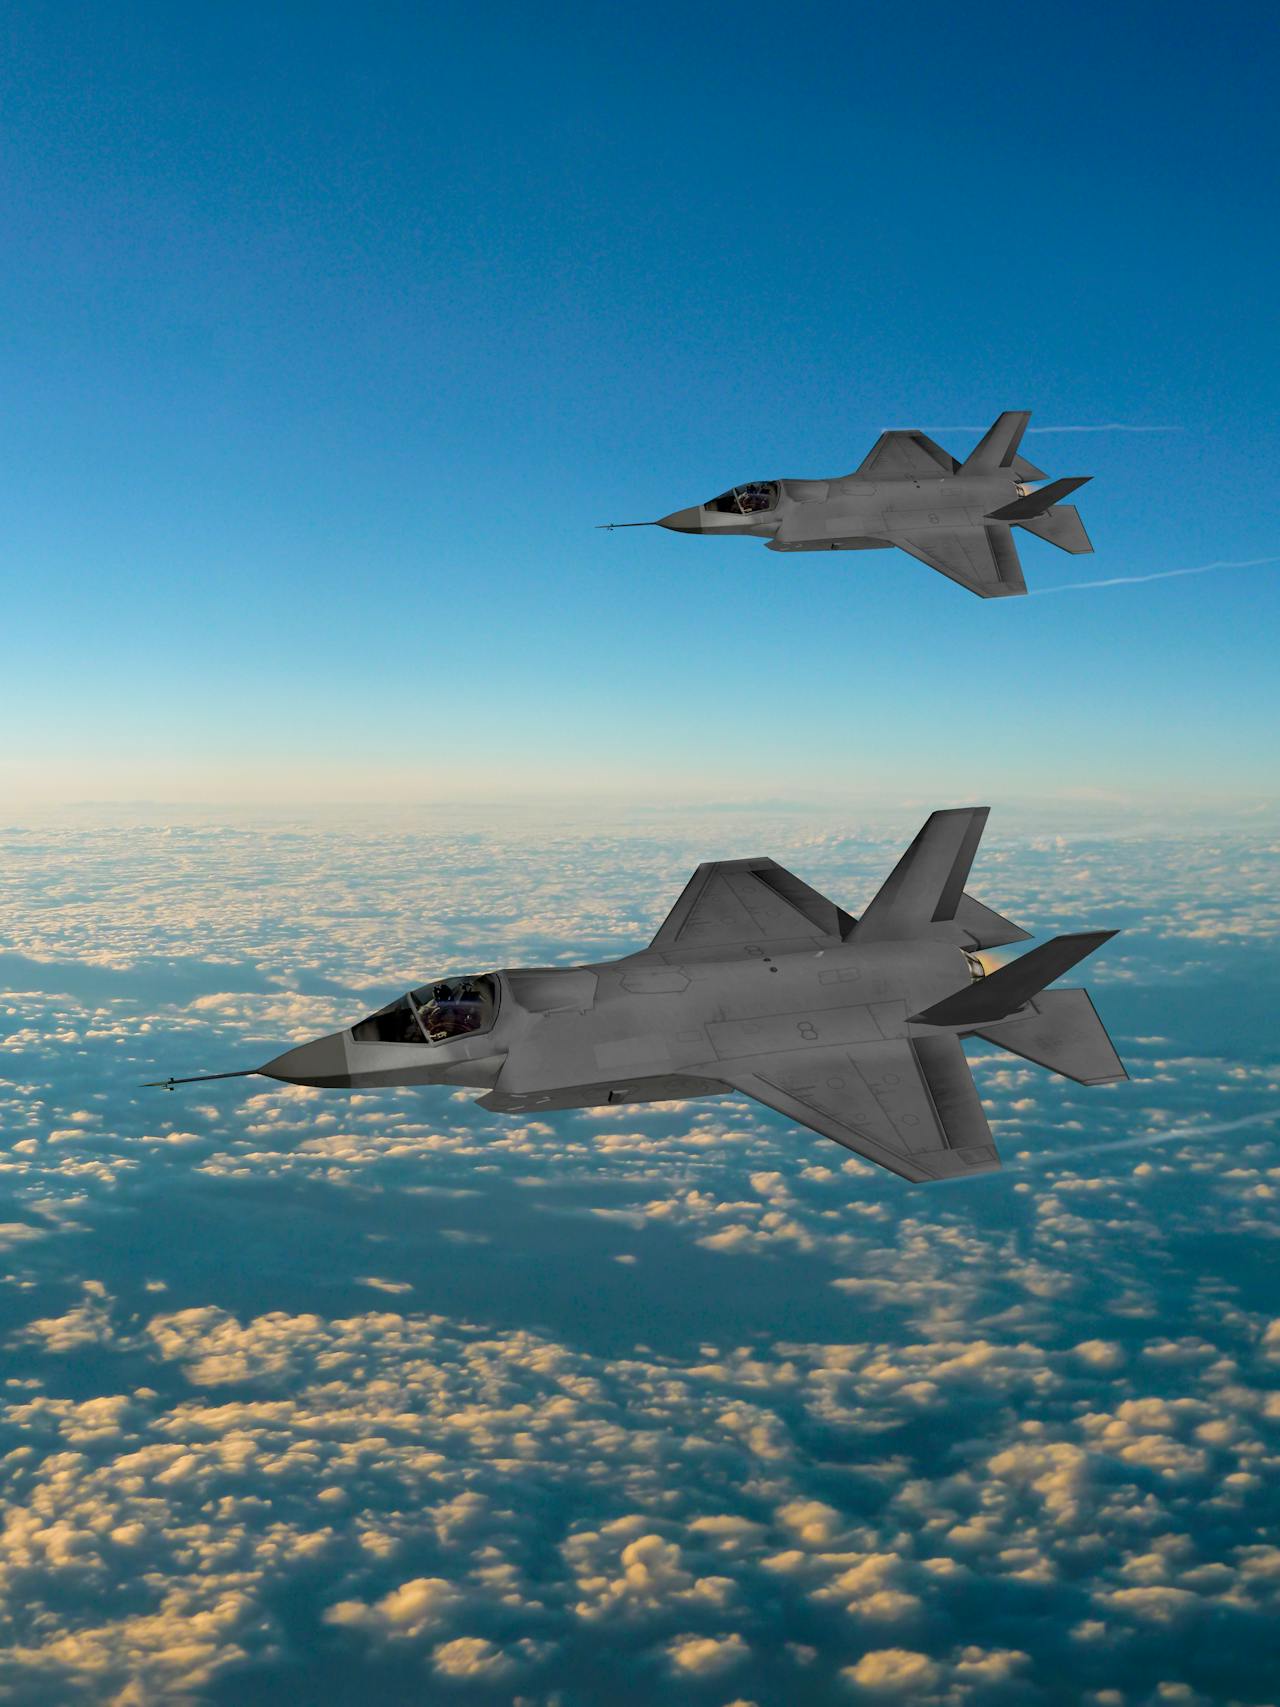 CAD/CAM Services won a Small Business Technology Transfer Research (STTR) award to solve surface metrology and delamination issues for the F-35 fighter jet.